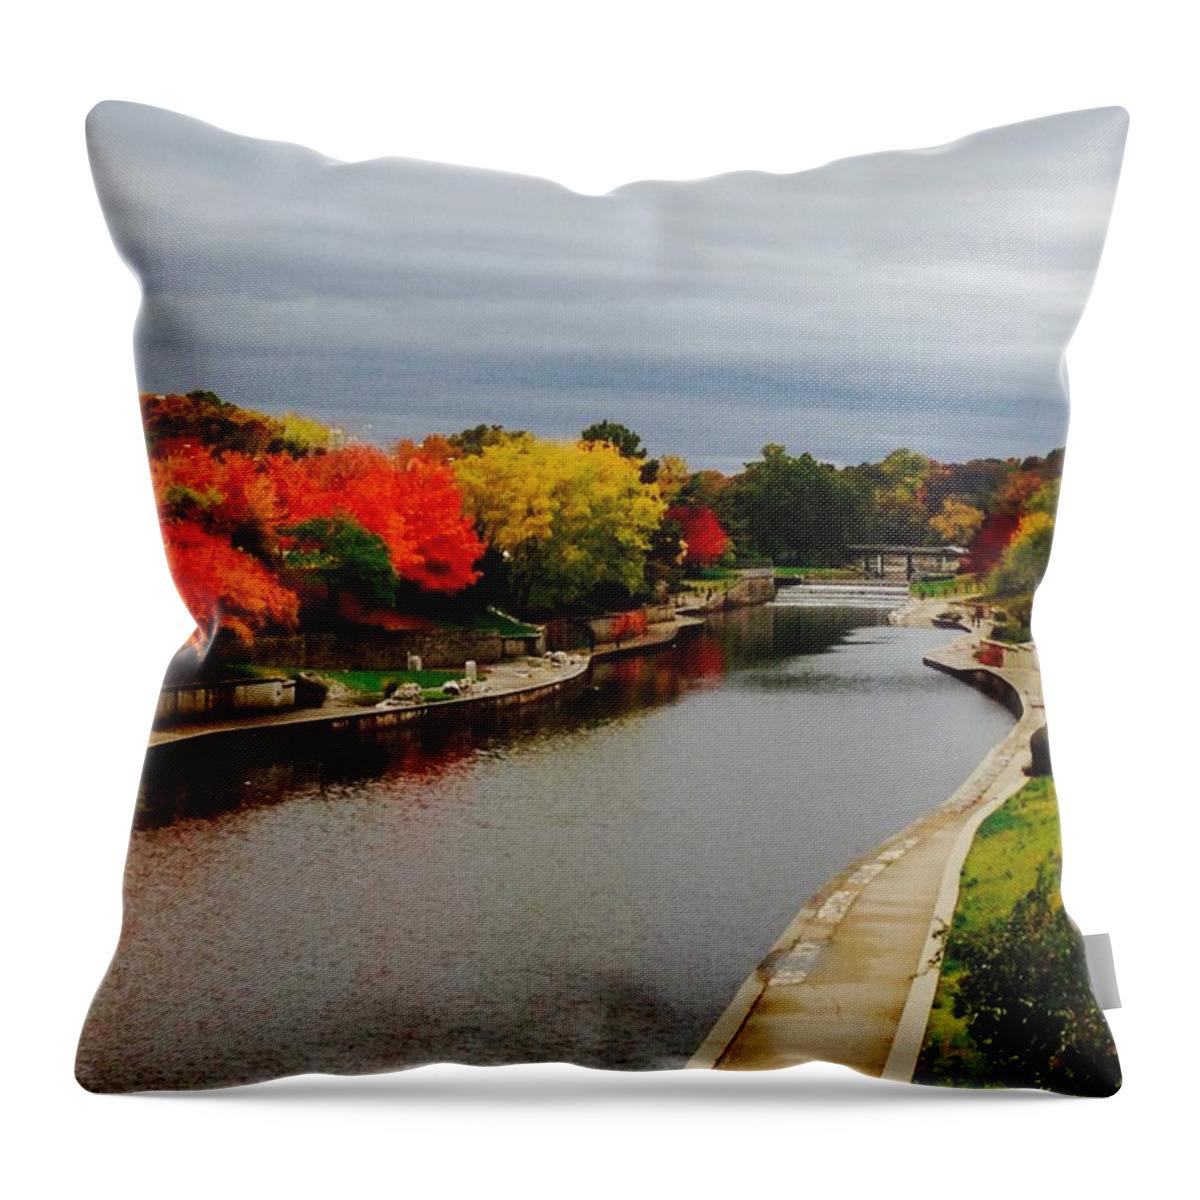 Kcmo Throw Pillow featuring the photograph Plaza Colour Pop by Michael Oceanofwisdom Bidwell